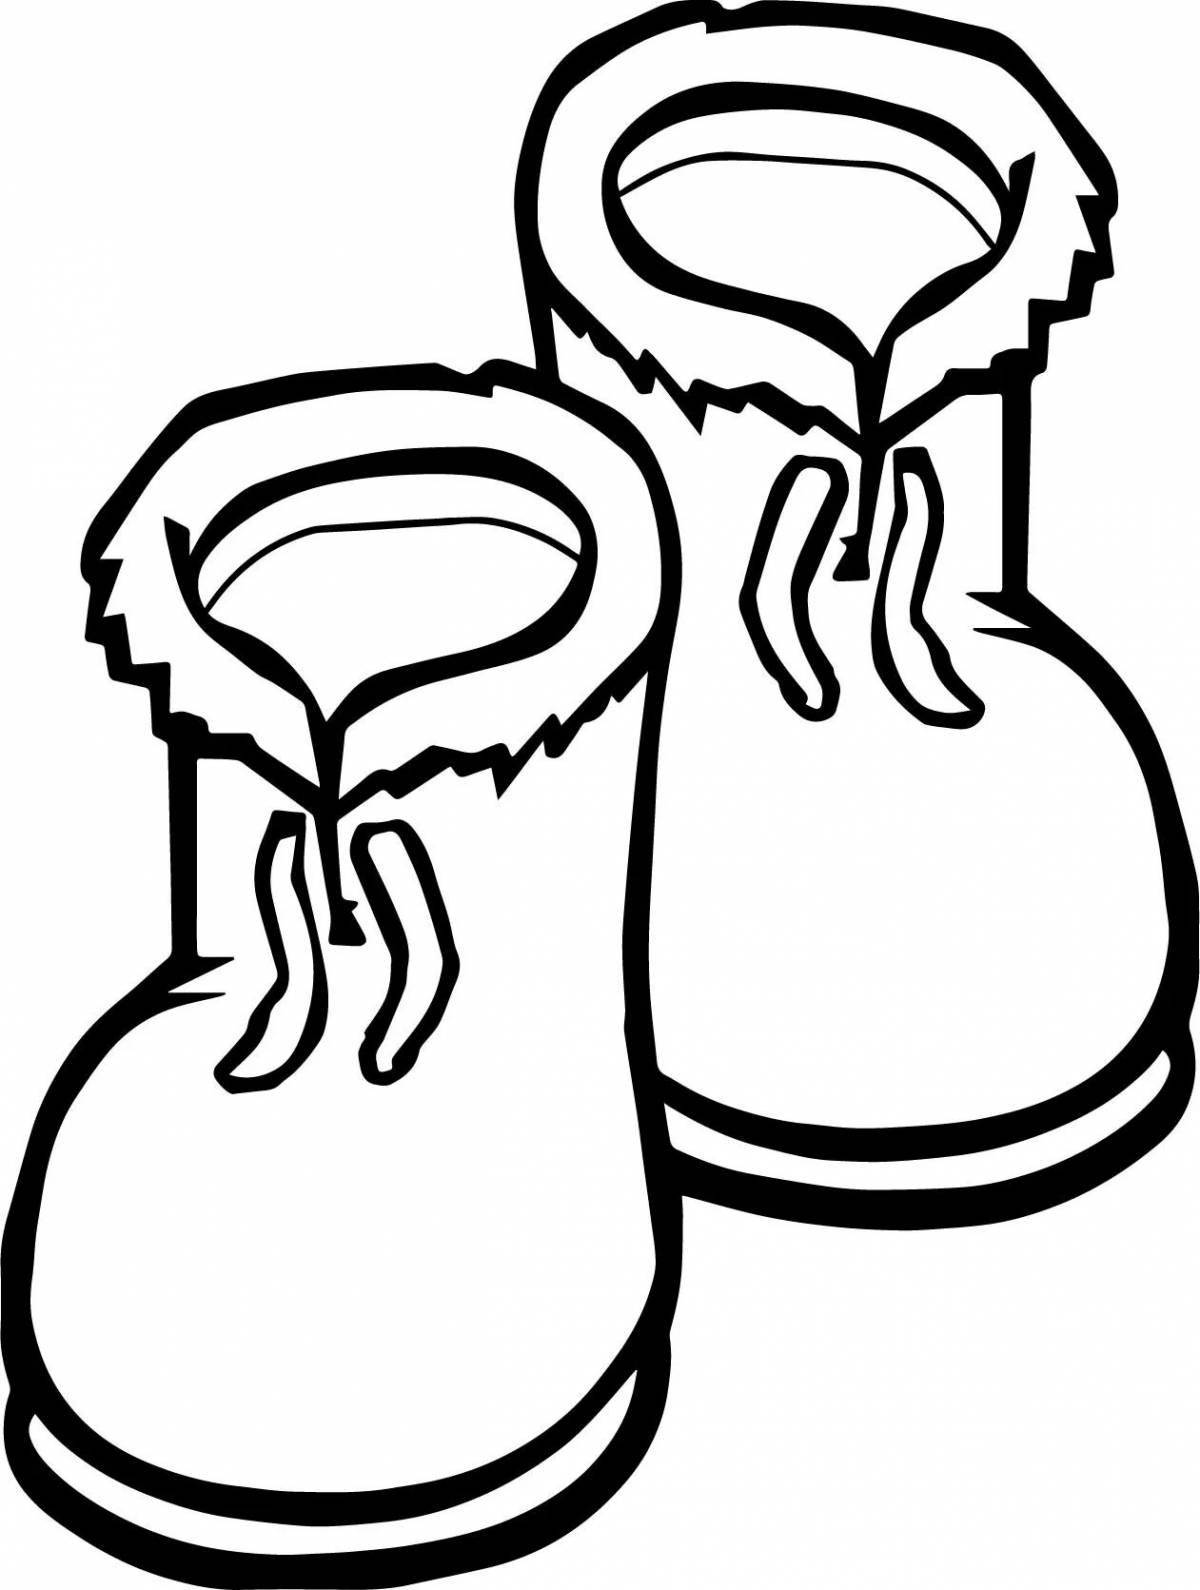 Colourful winter boots coloring page